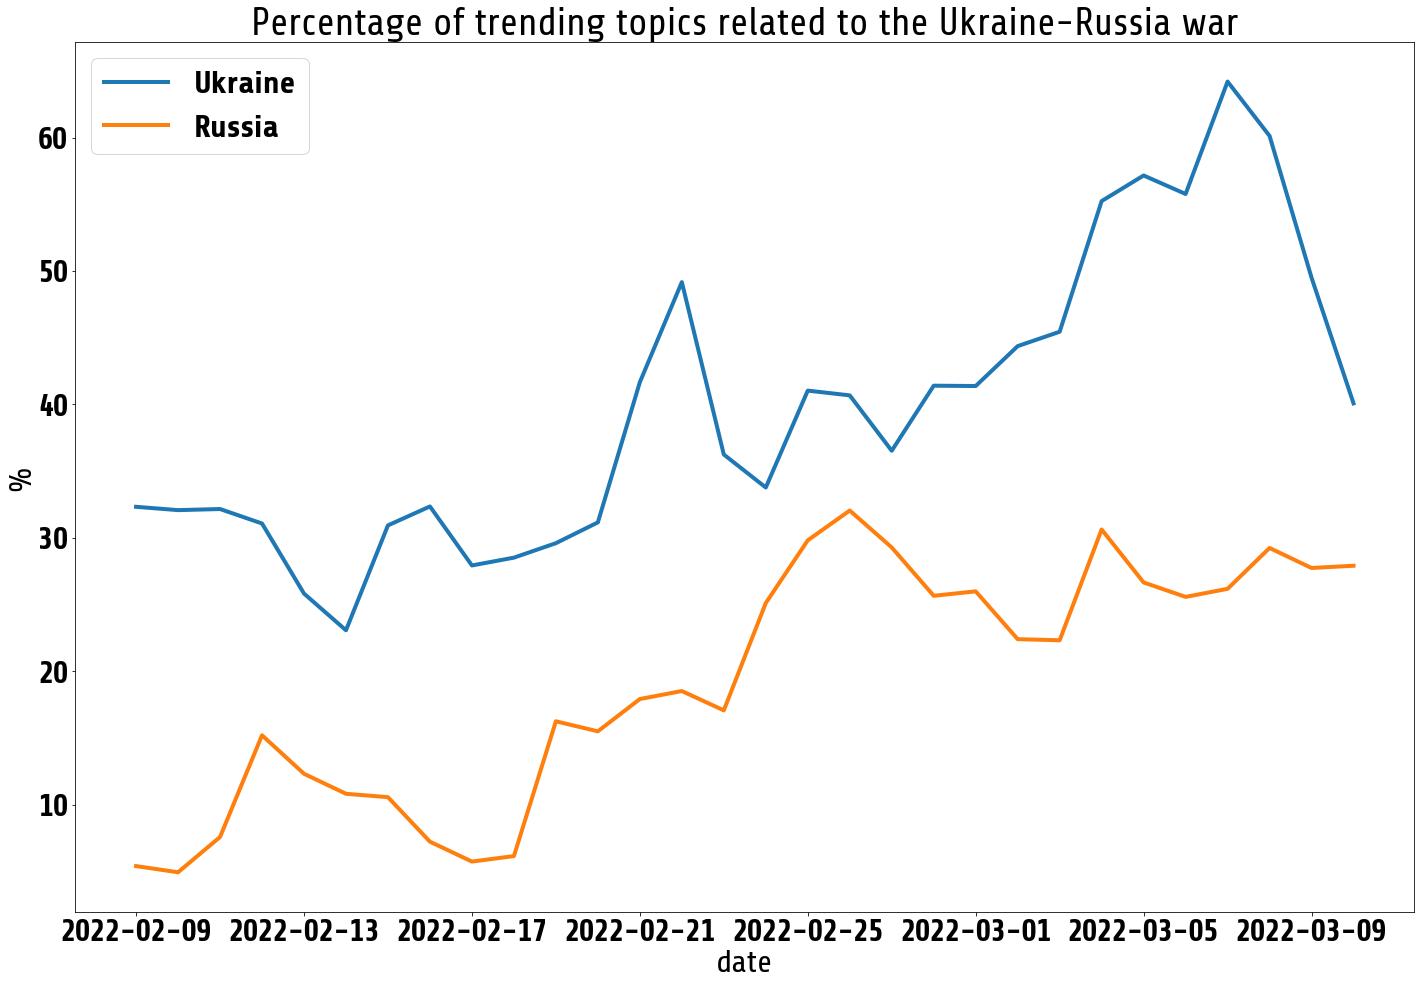 Ukraine and Russia trends related to the war per day